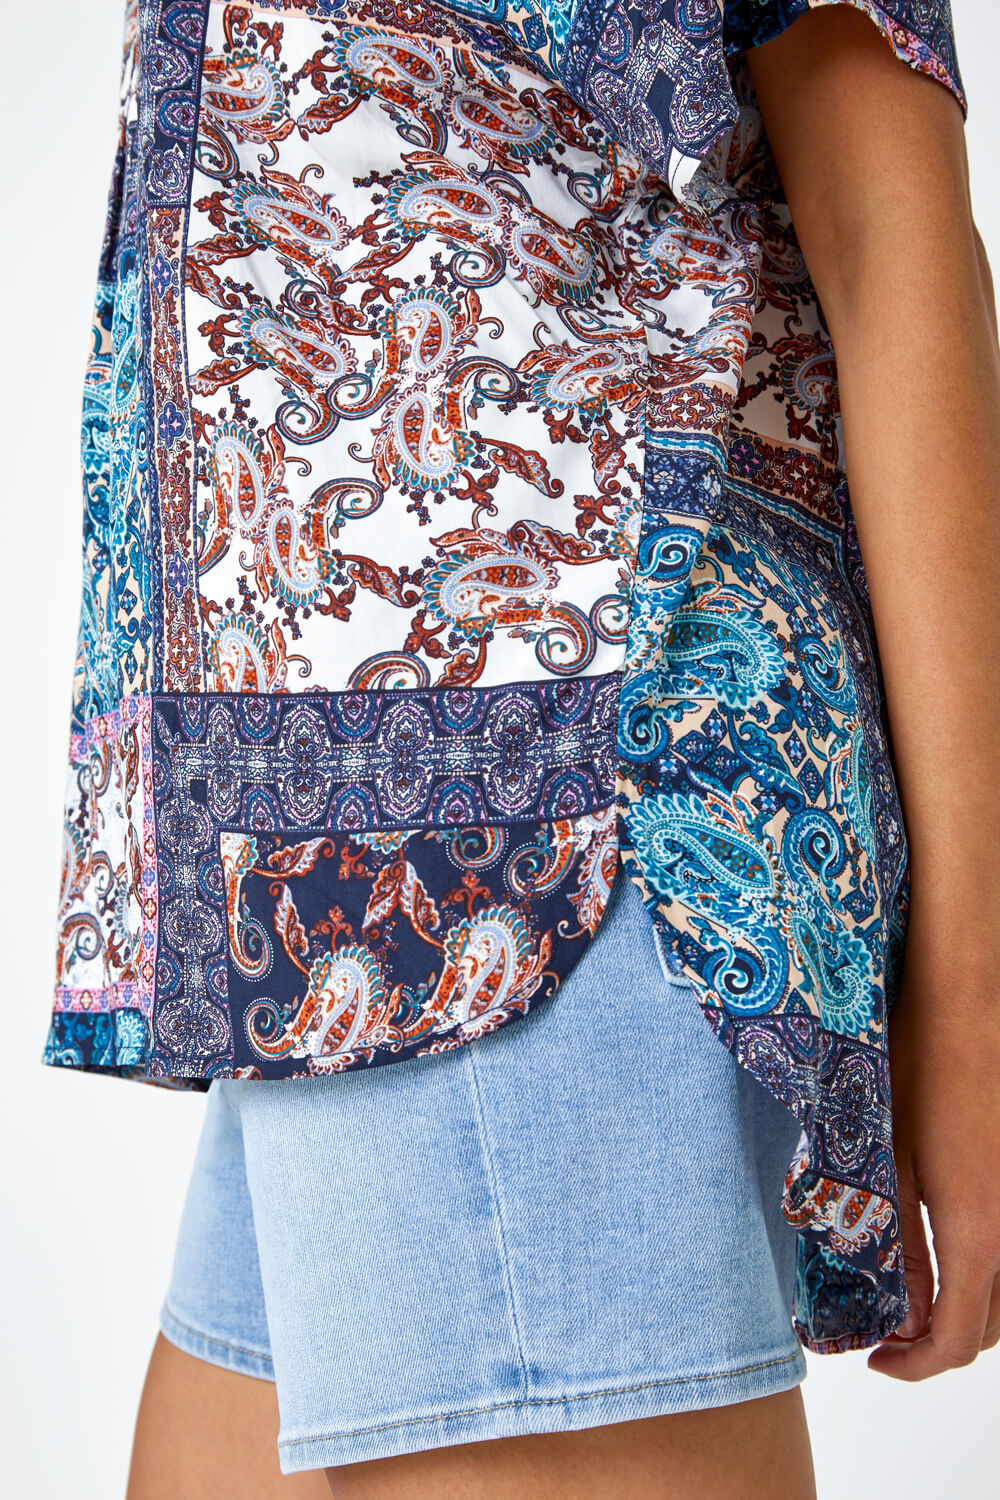 Blue Patchwork Scarf Print Woven Overshirt, Image 6 of 6